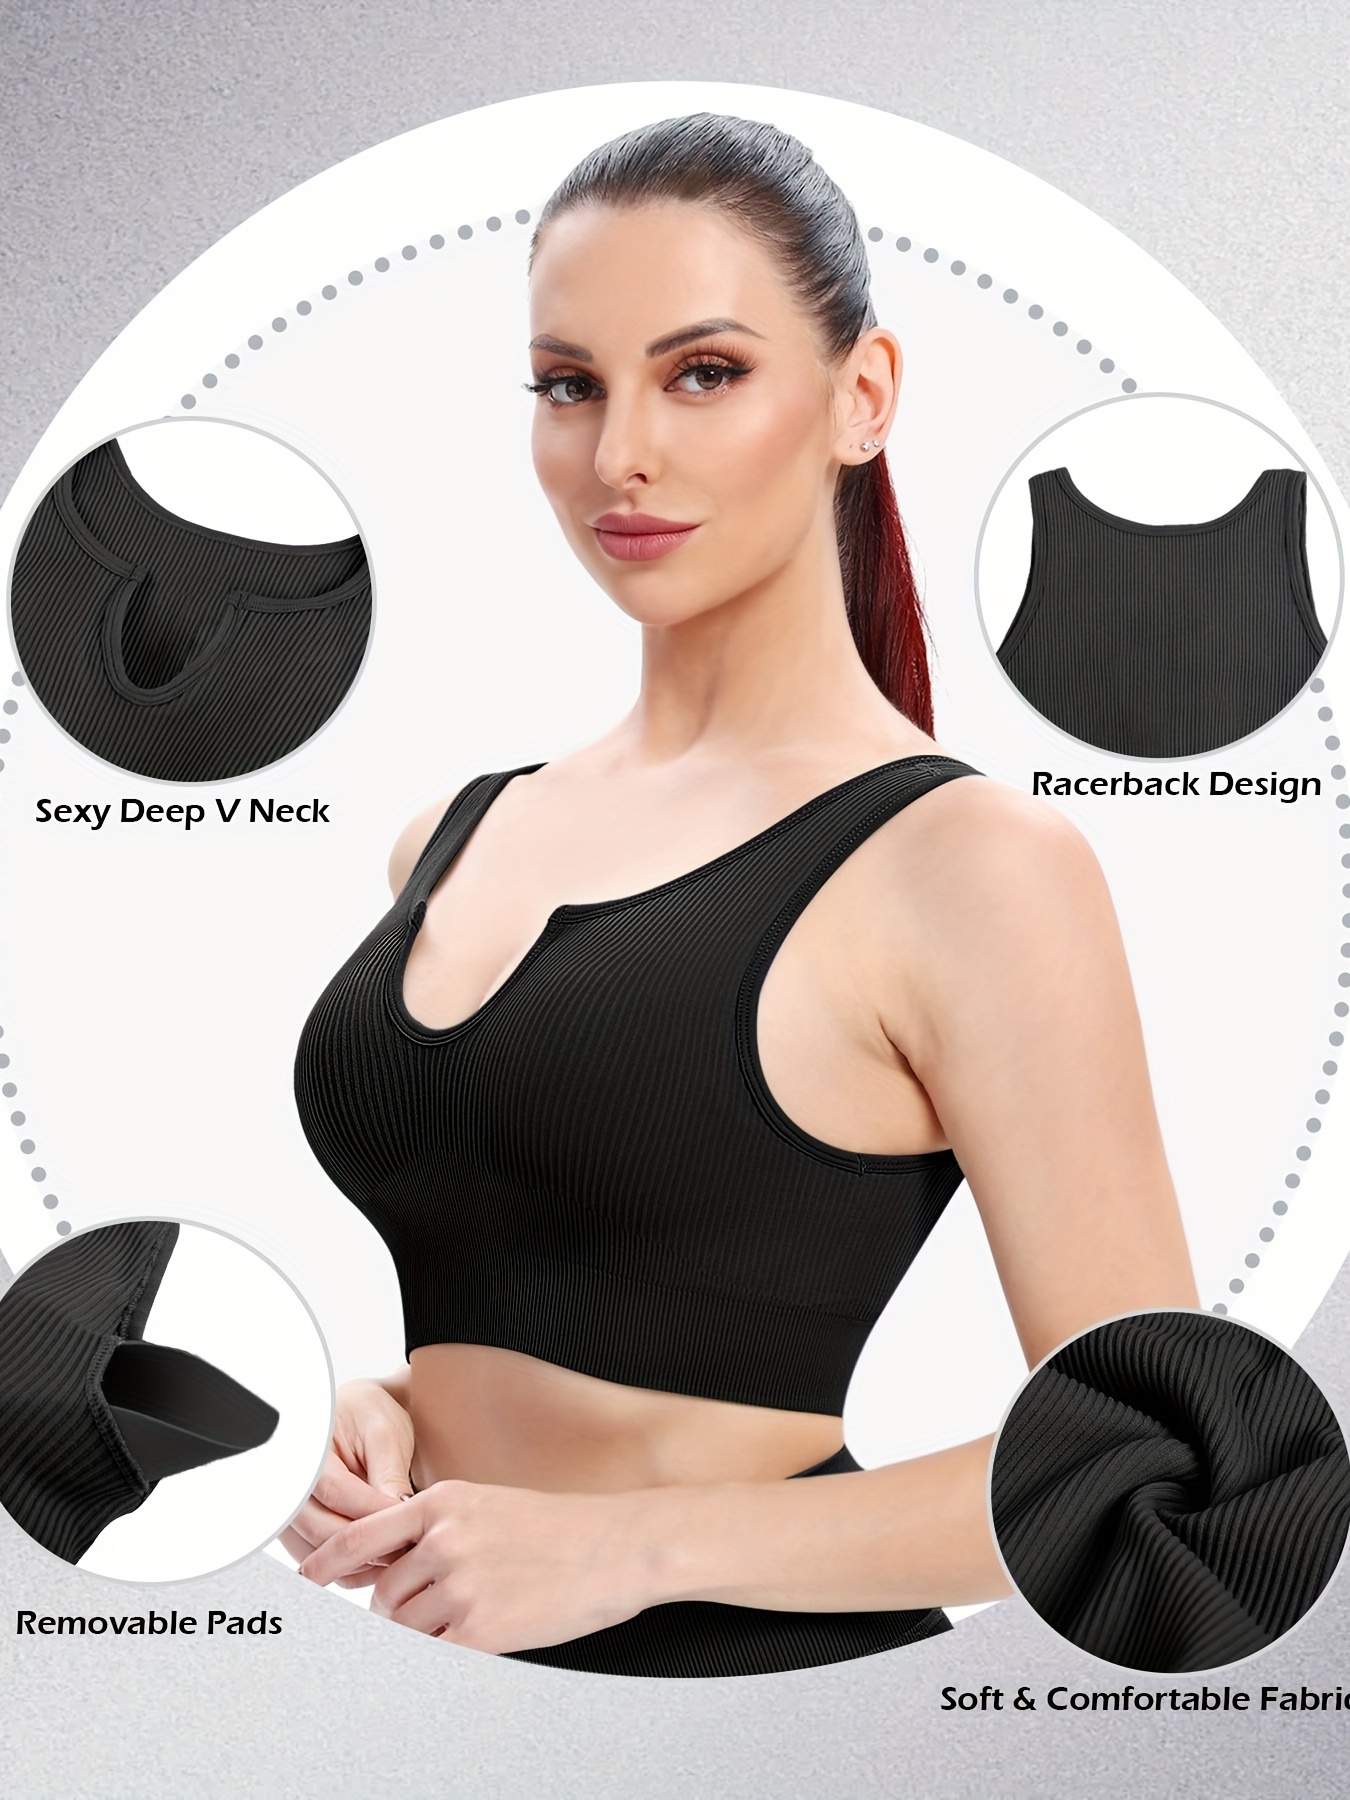 Womens Sports Bra Longline Wirefree with Padded Female Athletic